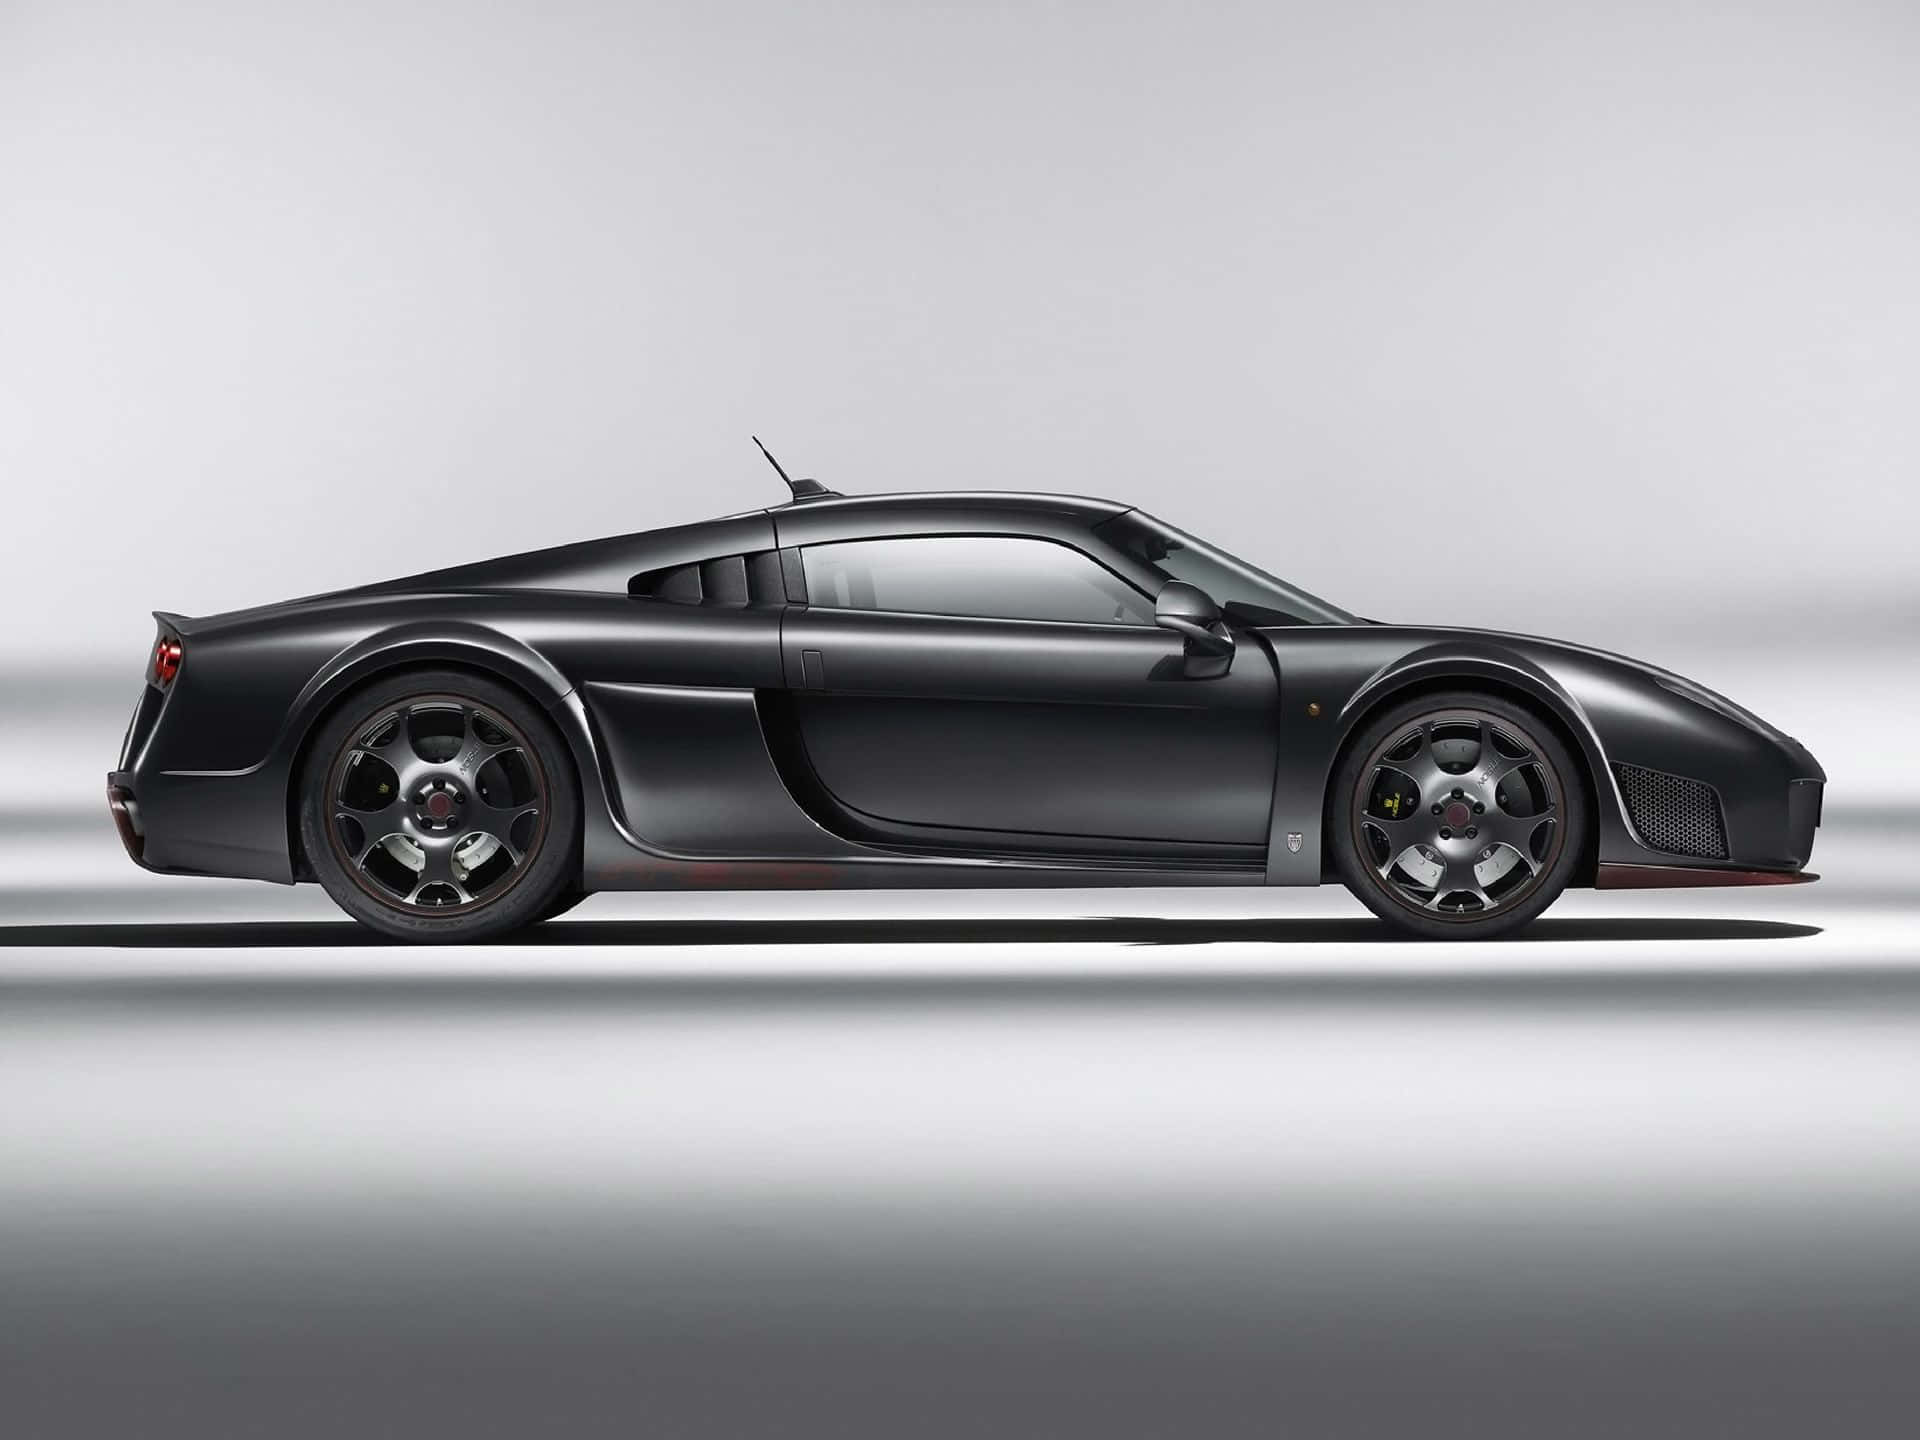 Caption: The Bold and Majestic Black Noble M600 Wallpaper